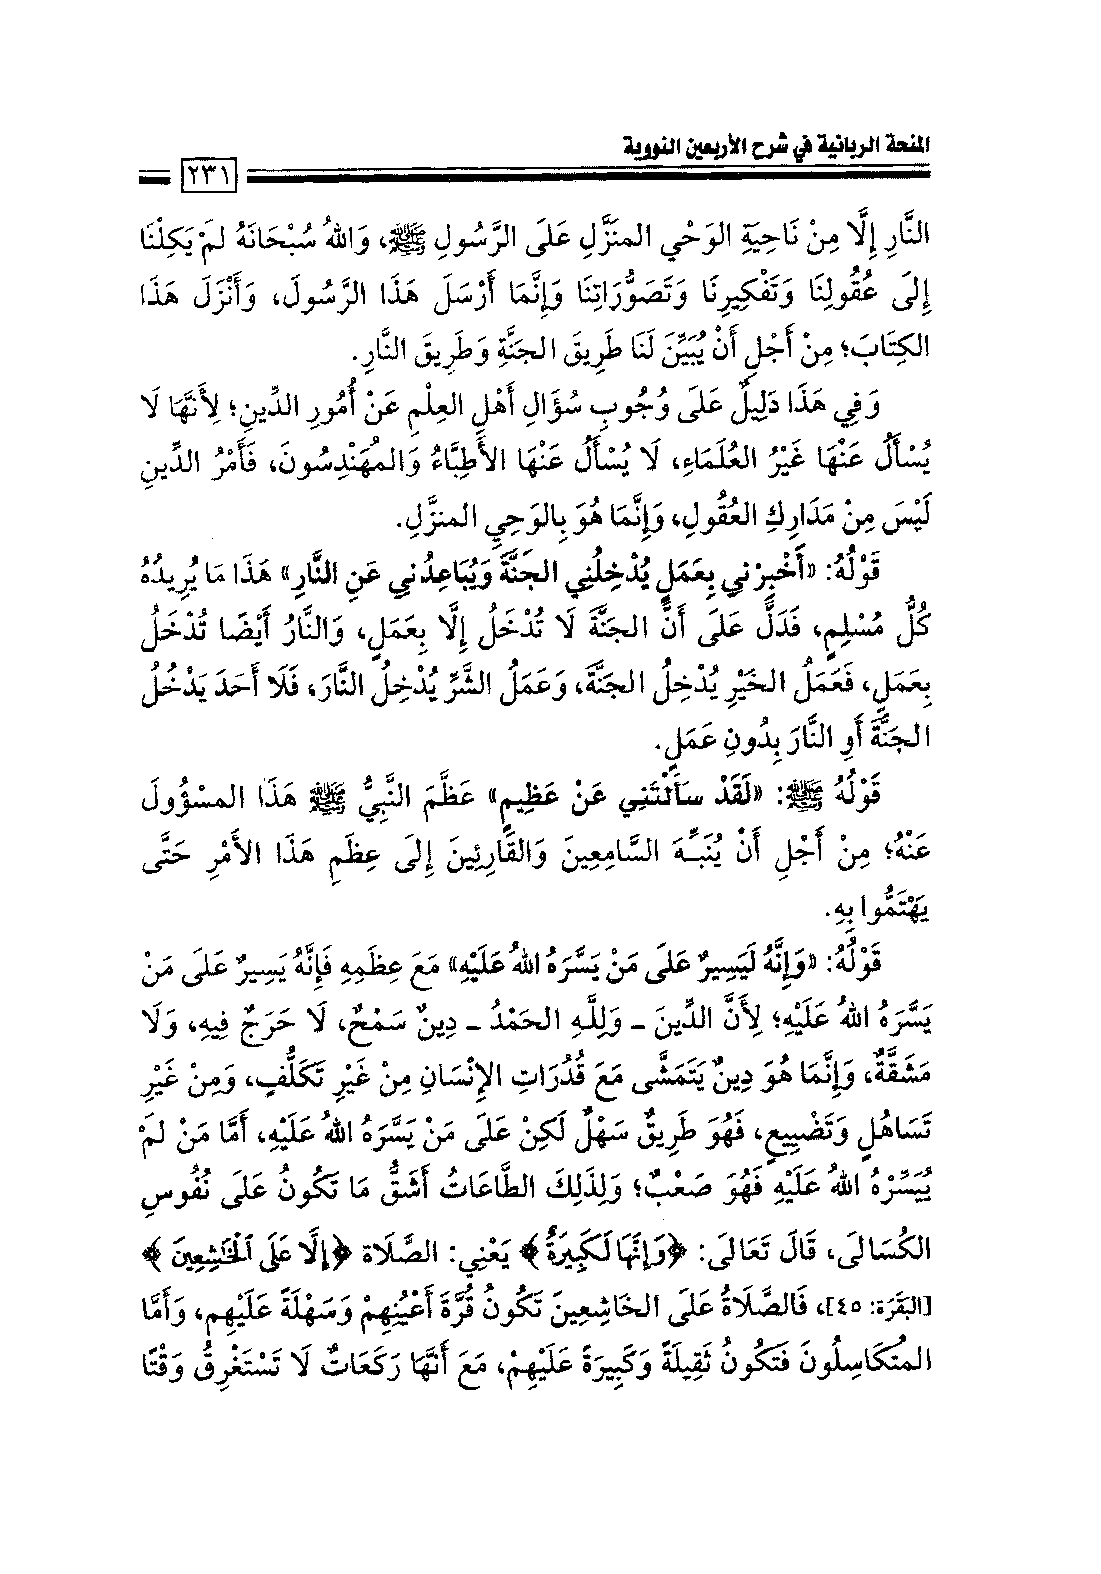 Page 233